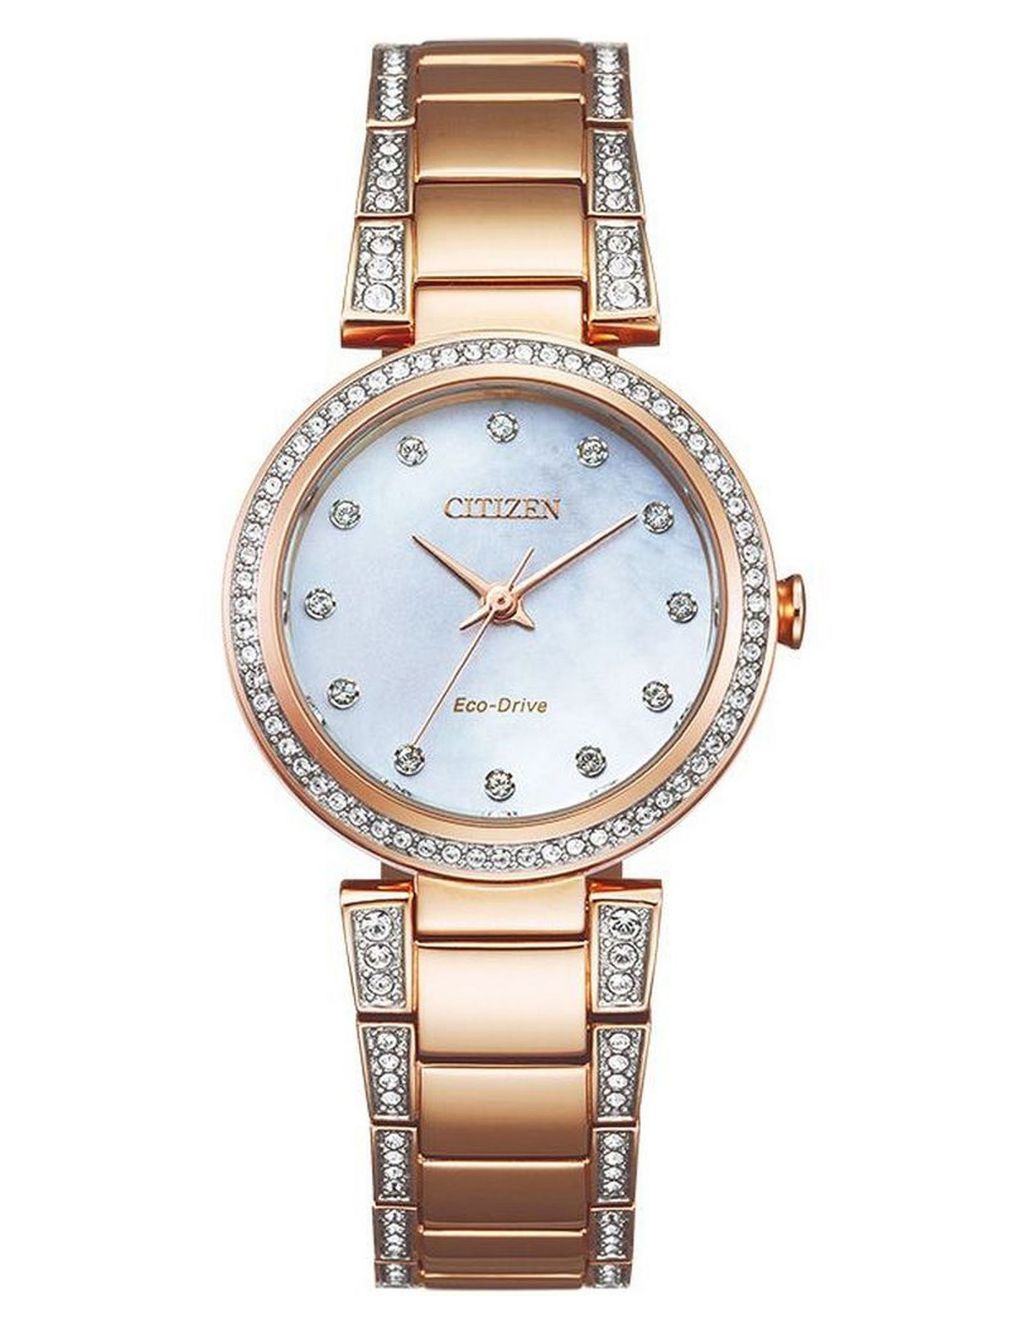 Citizen Eco-Drive Rose Gold Plated Watch image 1